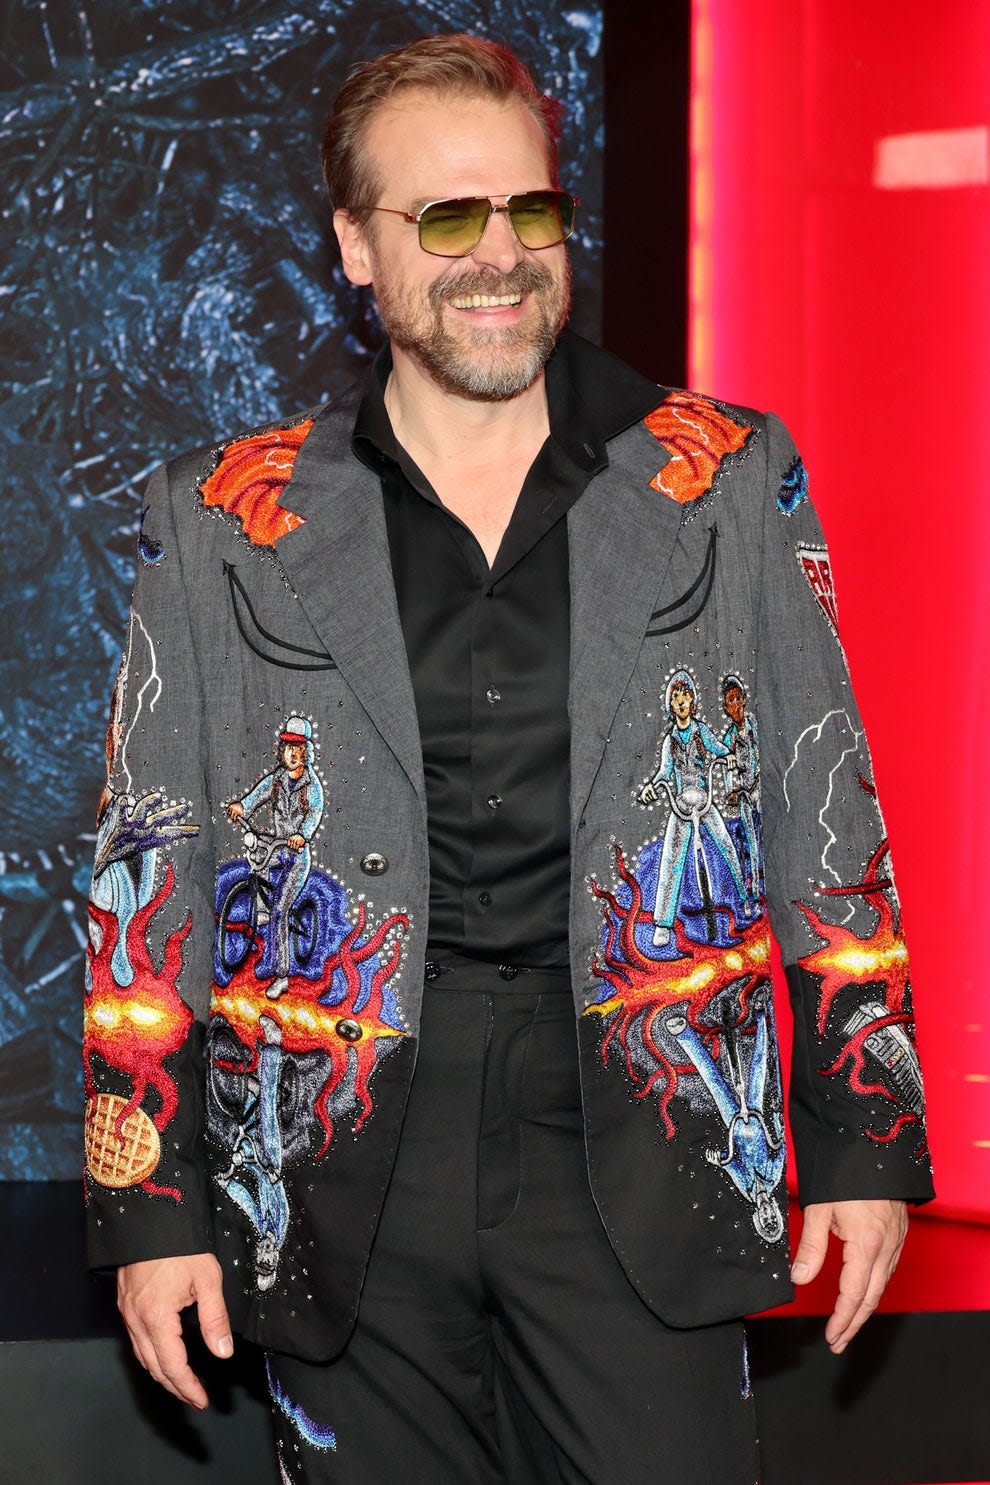 David Harbour laughing with an embroidered blazer on at an event